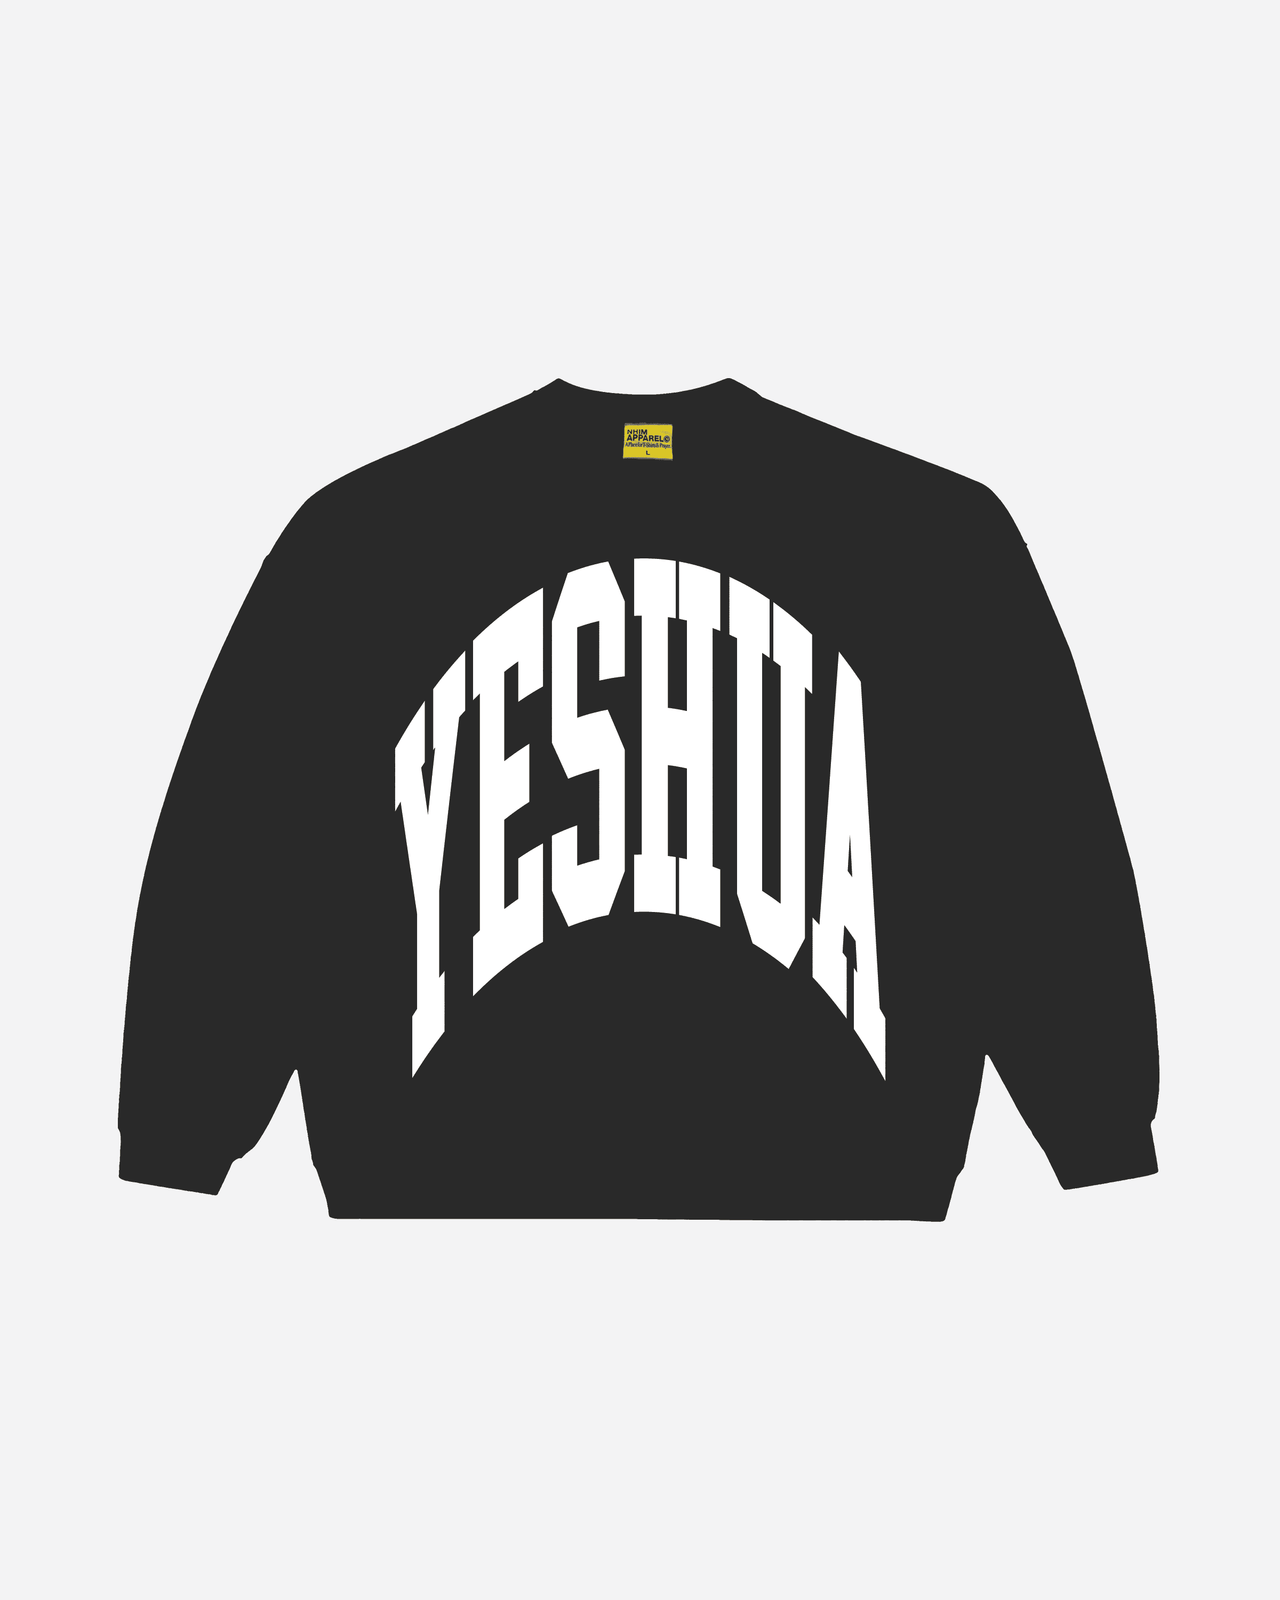 The Yeshua Spirit crewneck sweatshirt in black by NHIM Apparel Christian clothing brand. He came to heal us, deliver us, and make us whole.